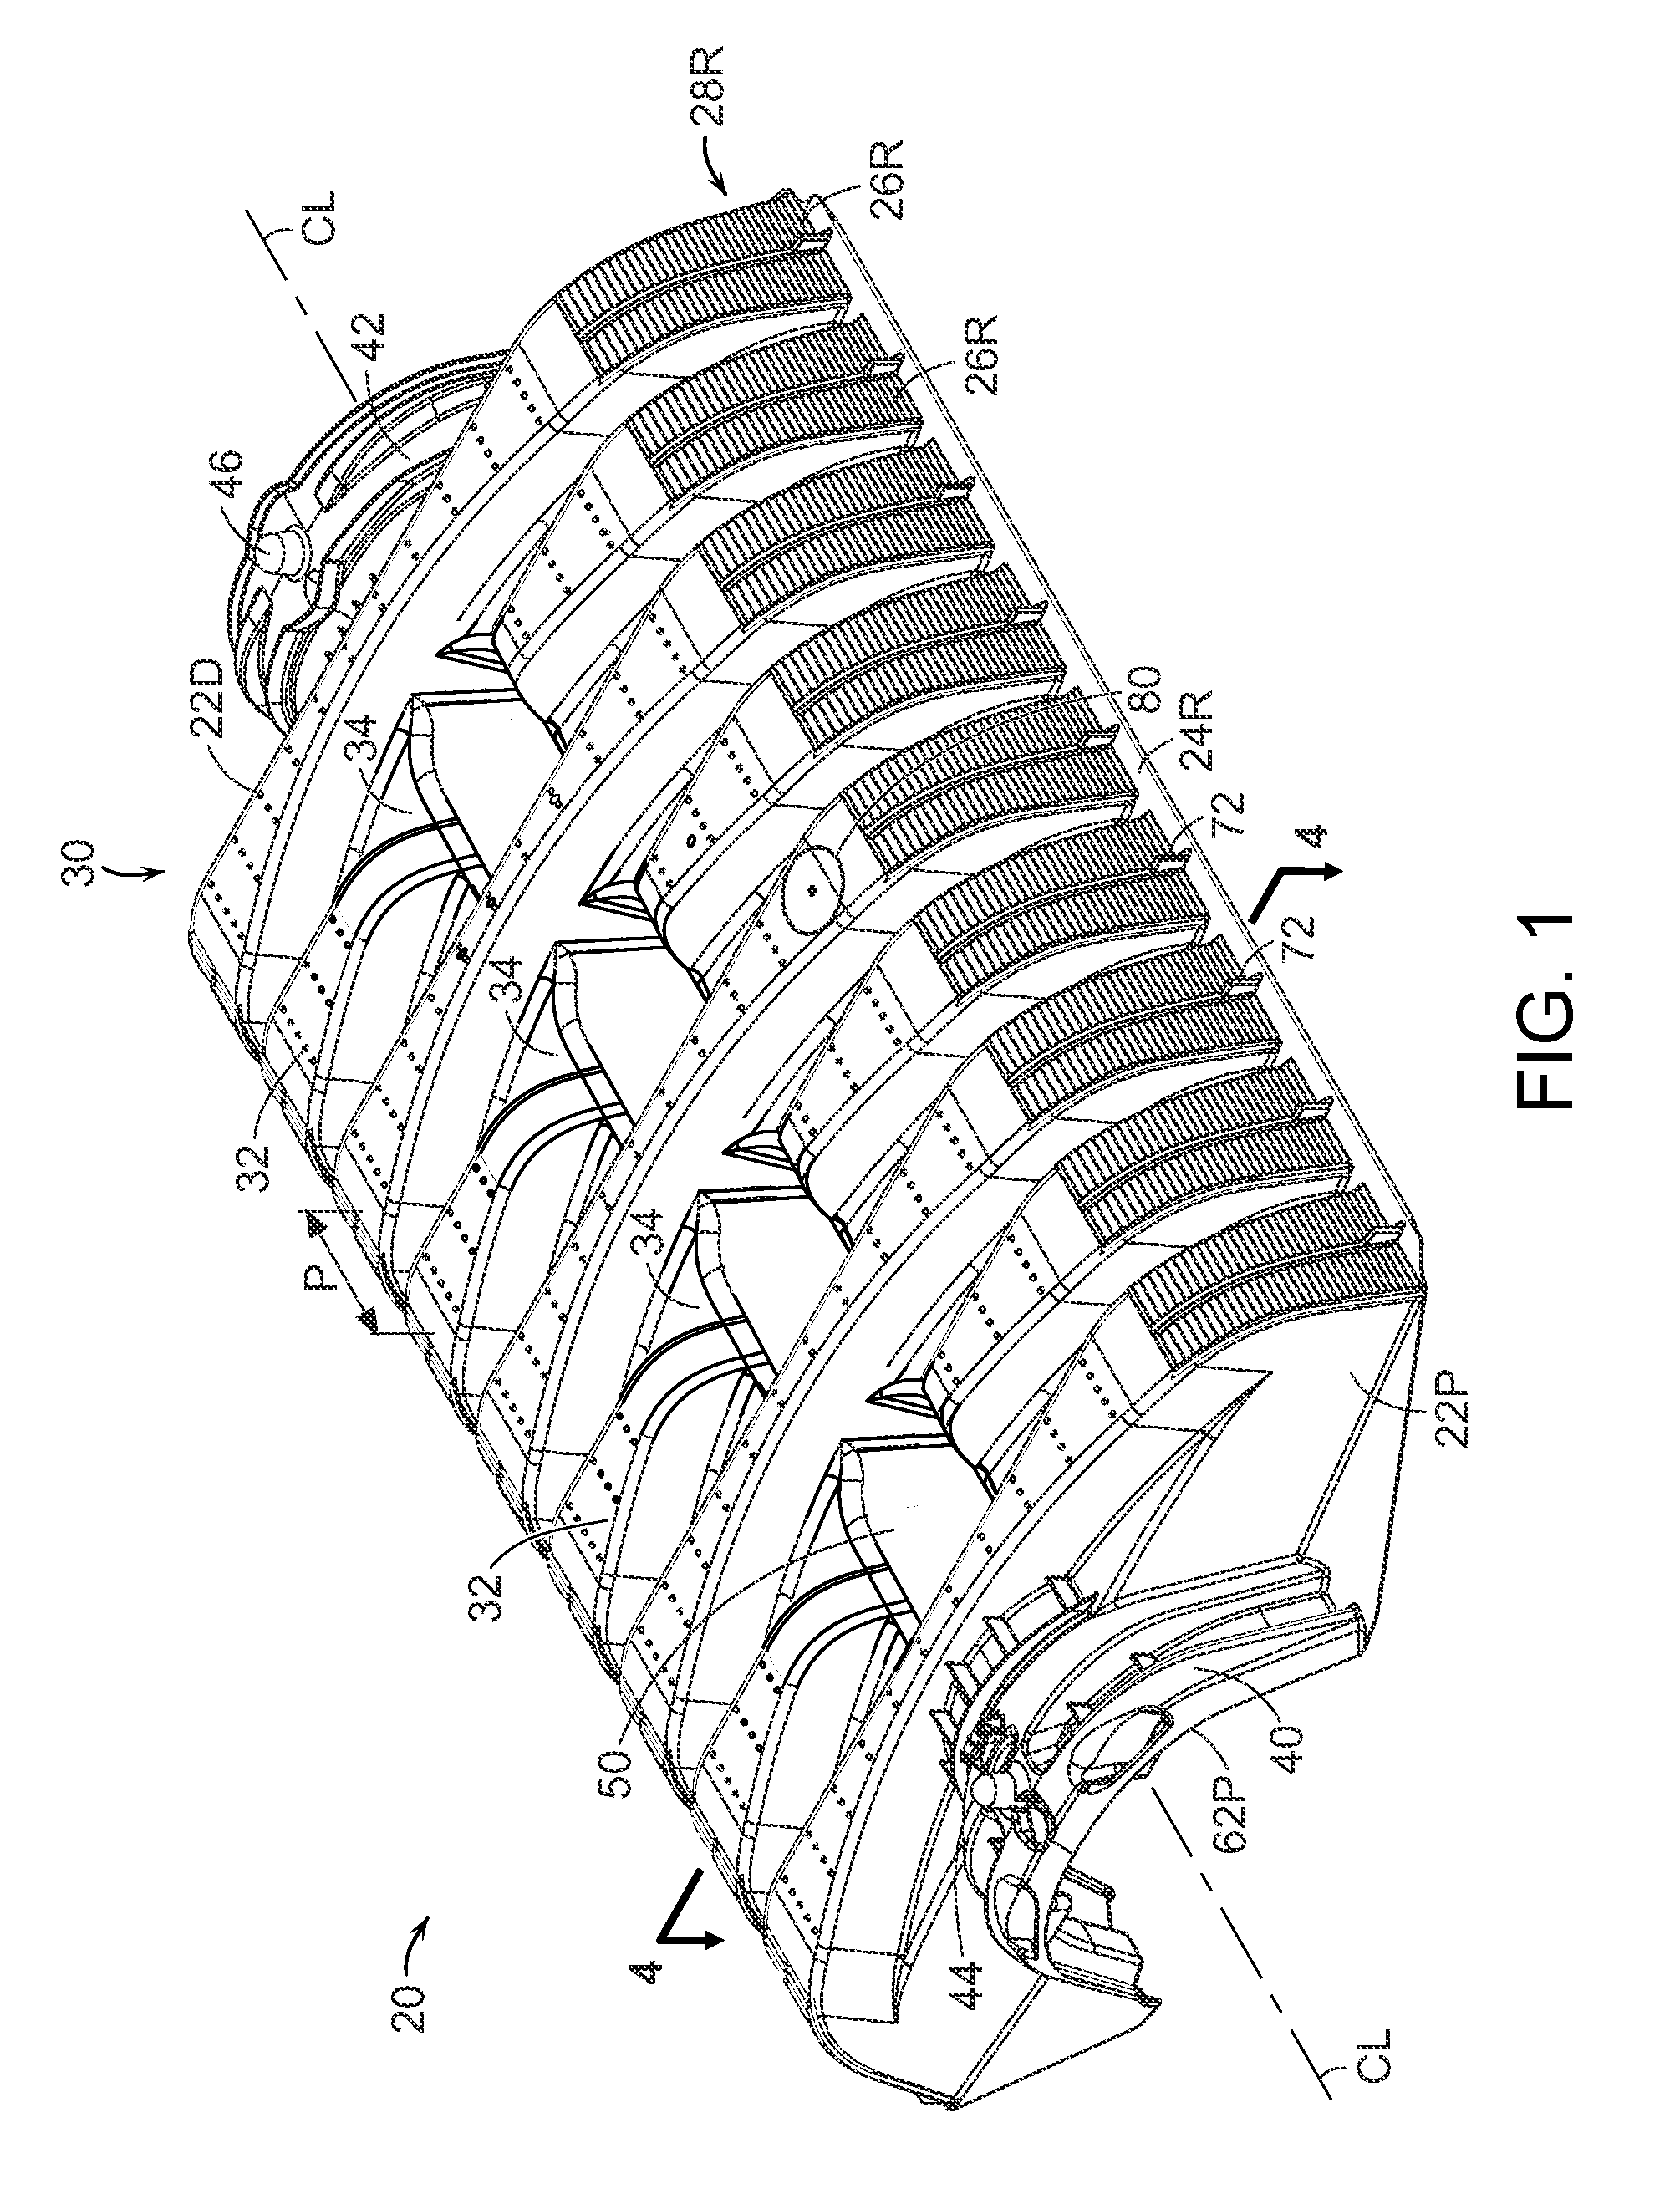 Corrugated Leaching Chamber with Hollow Pillar Supports